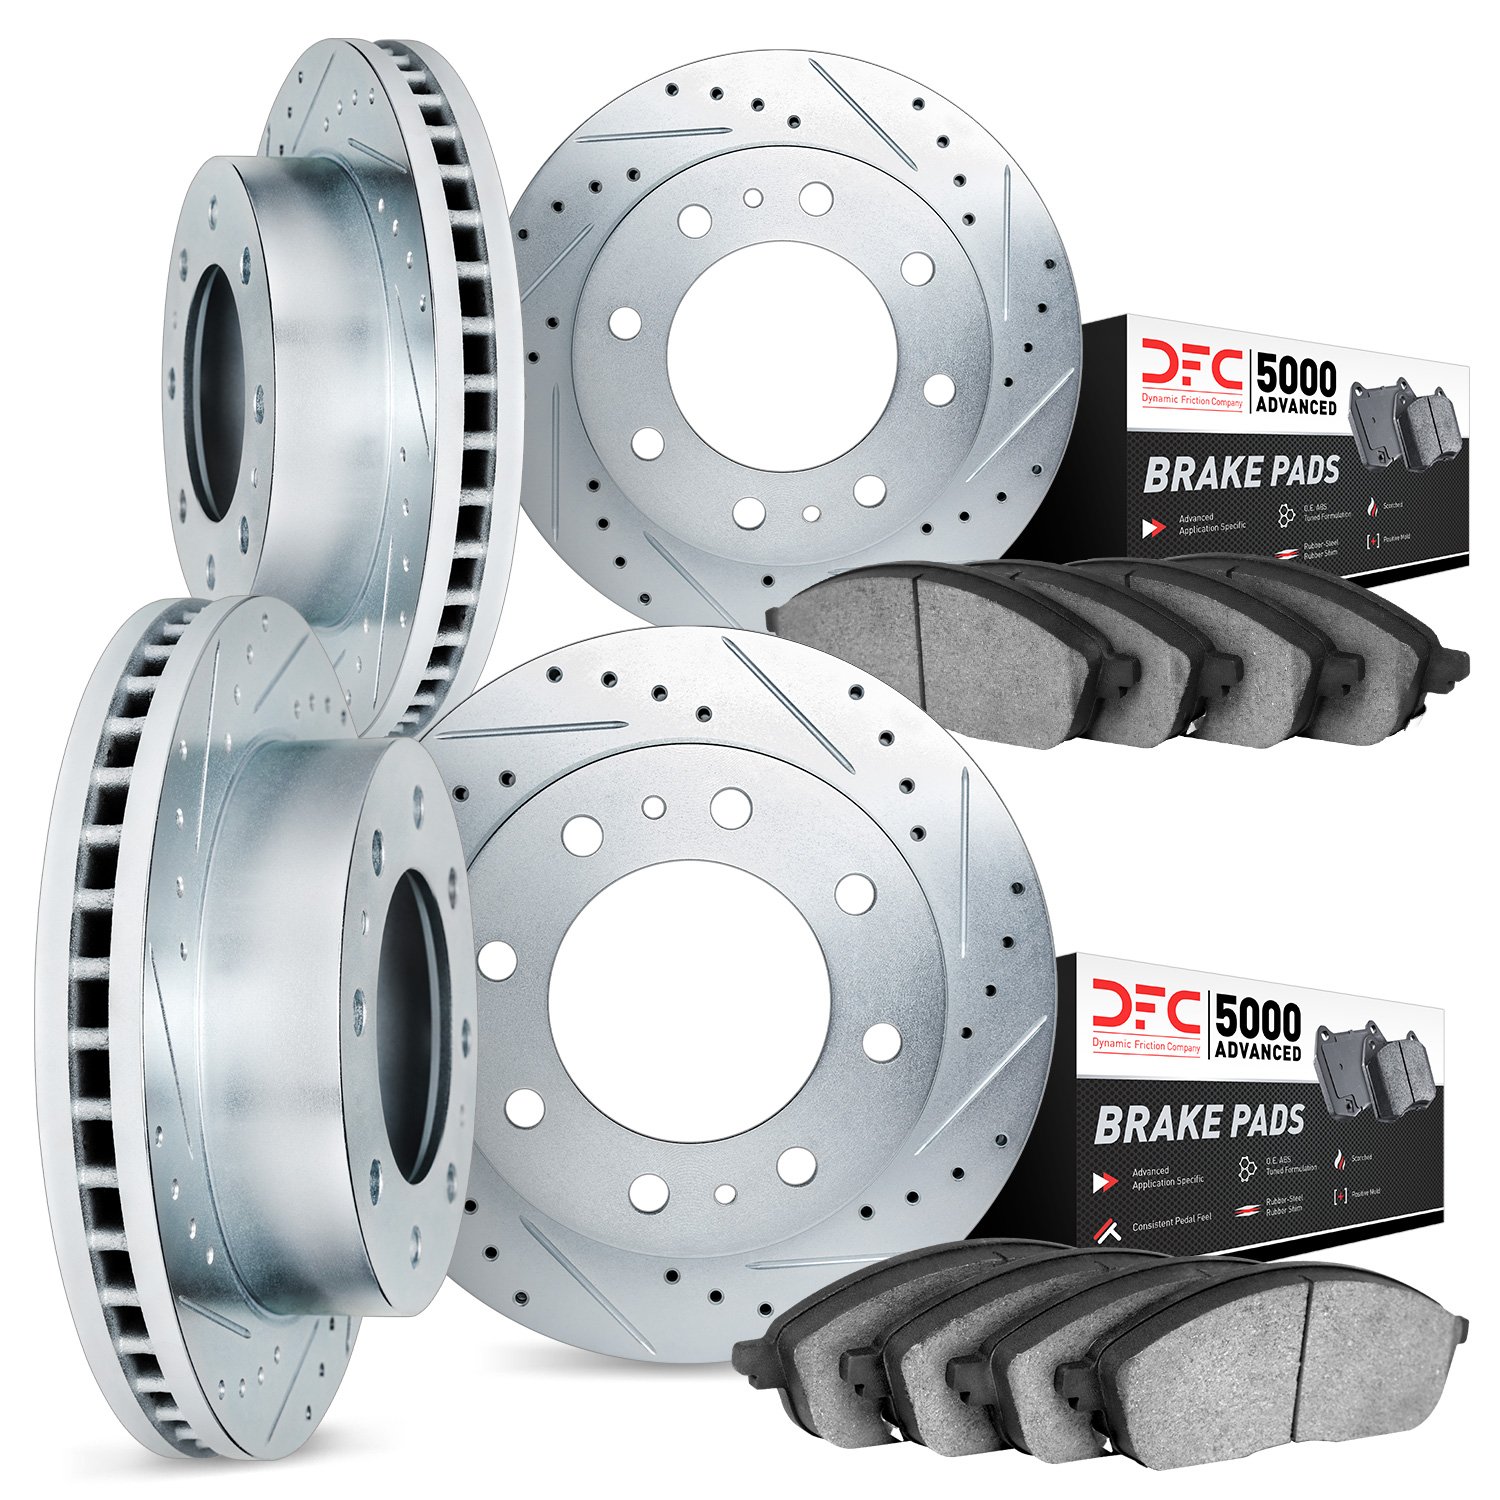 7504-48008 Drilled/Slotted Brake Rotors w/5000 Advanced Brake Pads Kit [Silver], 2003-2017 GM, Position: Front and Rear